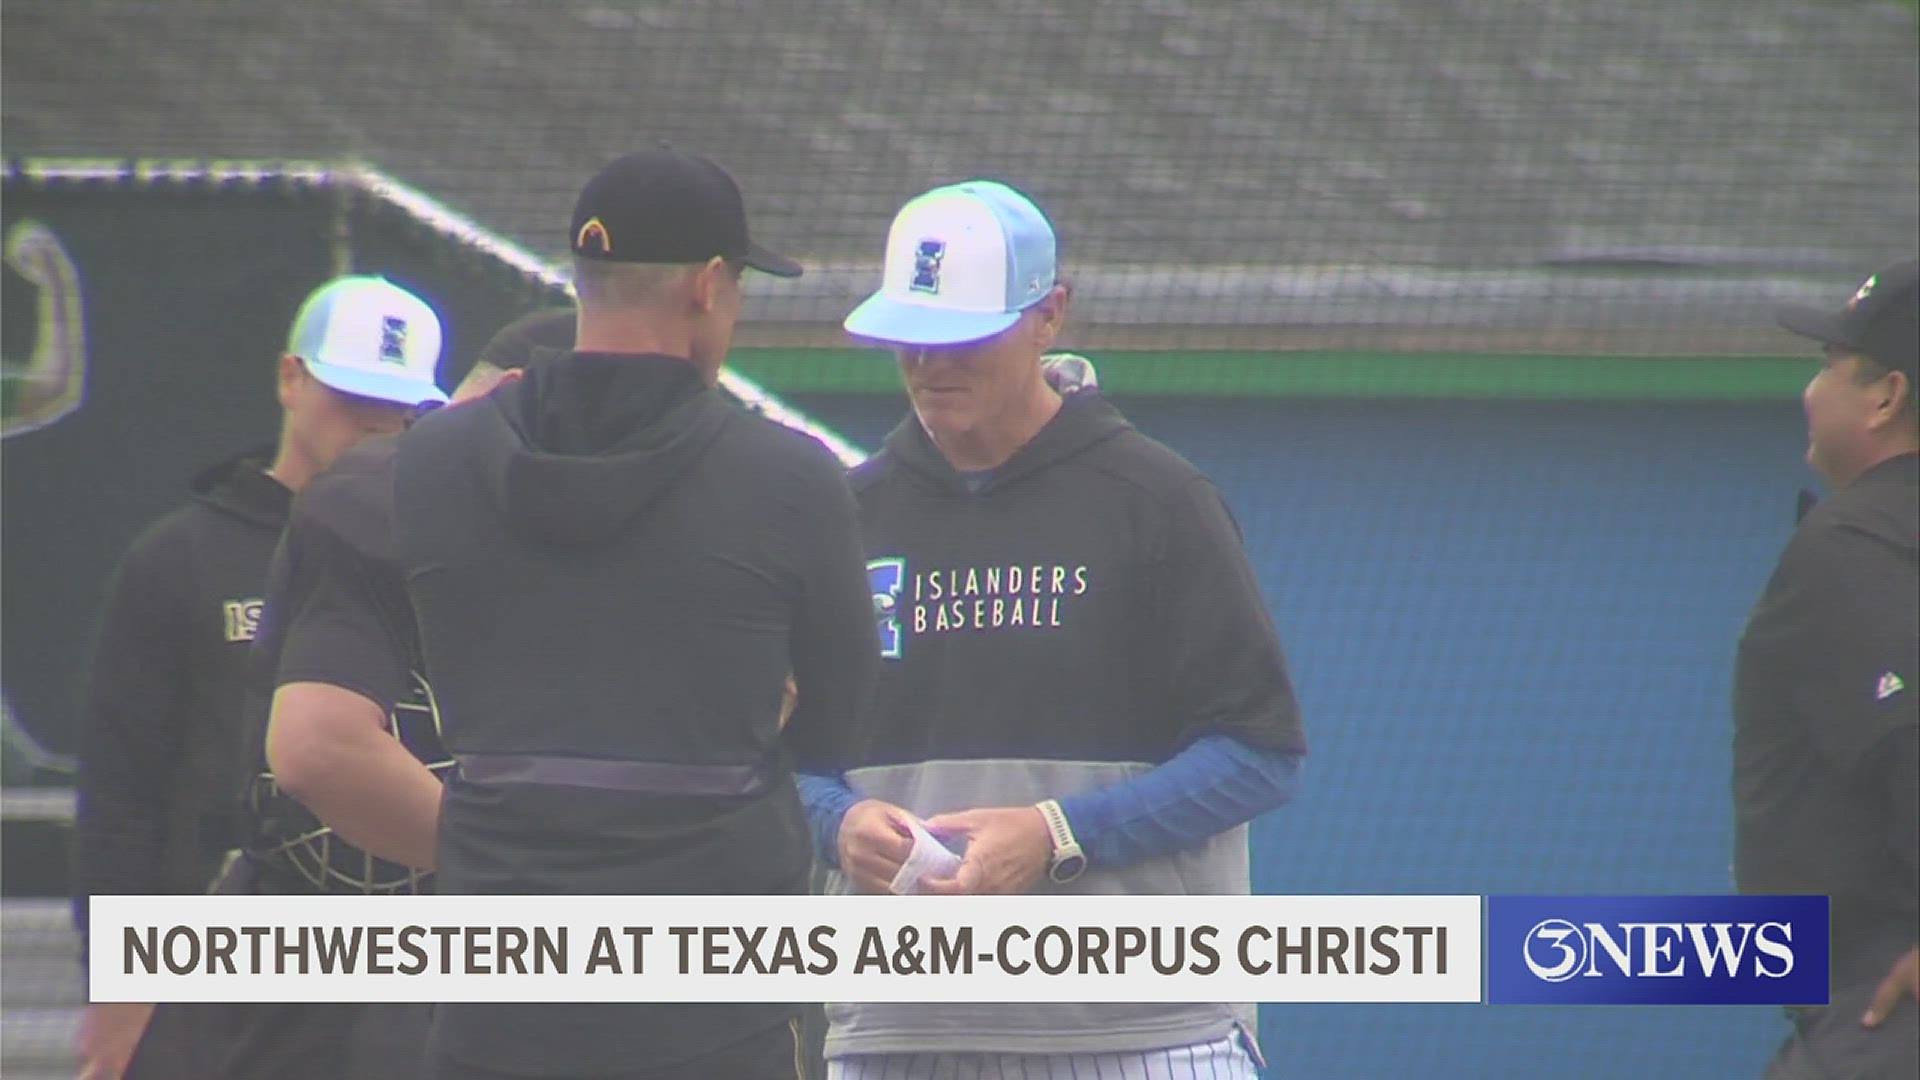 Texas A&M-CC was swept by the Wildcats in the brief two-game series.